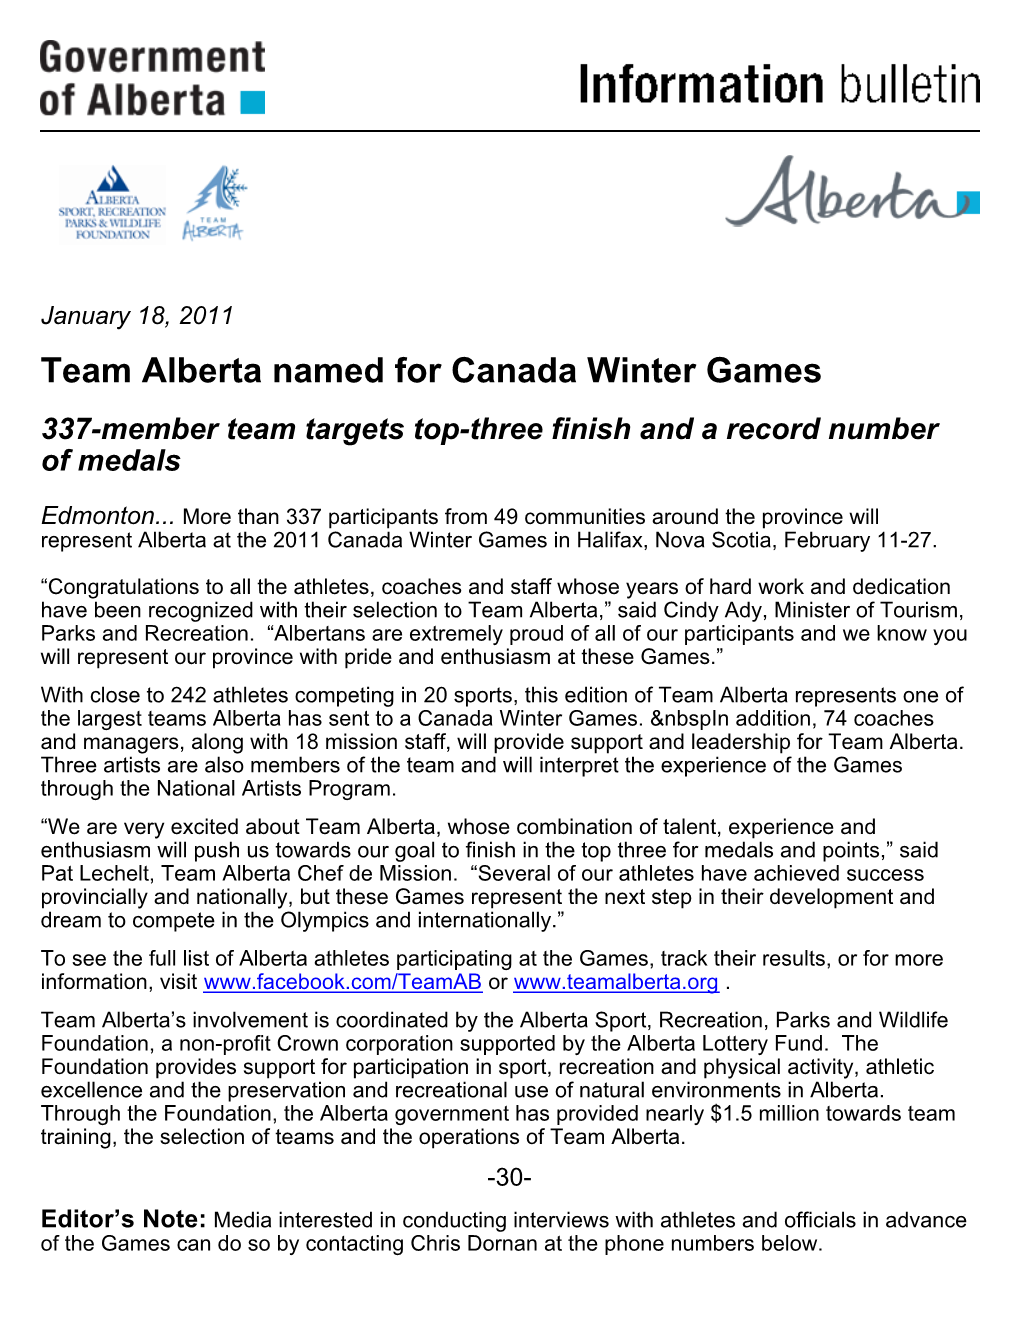 Team Alberta Named for Canada Winter Games 337-Member Team Targets Top-Three Finish and a Record Number of Medals